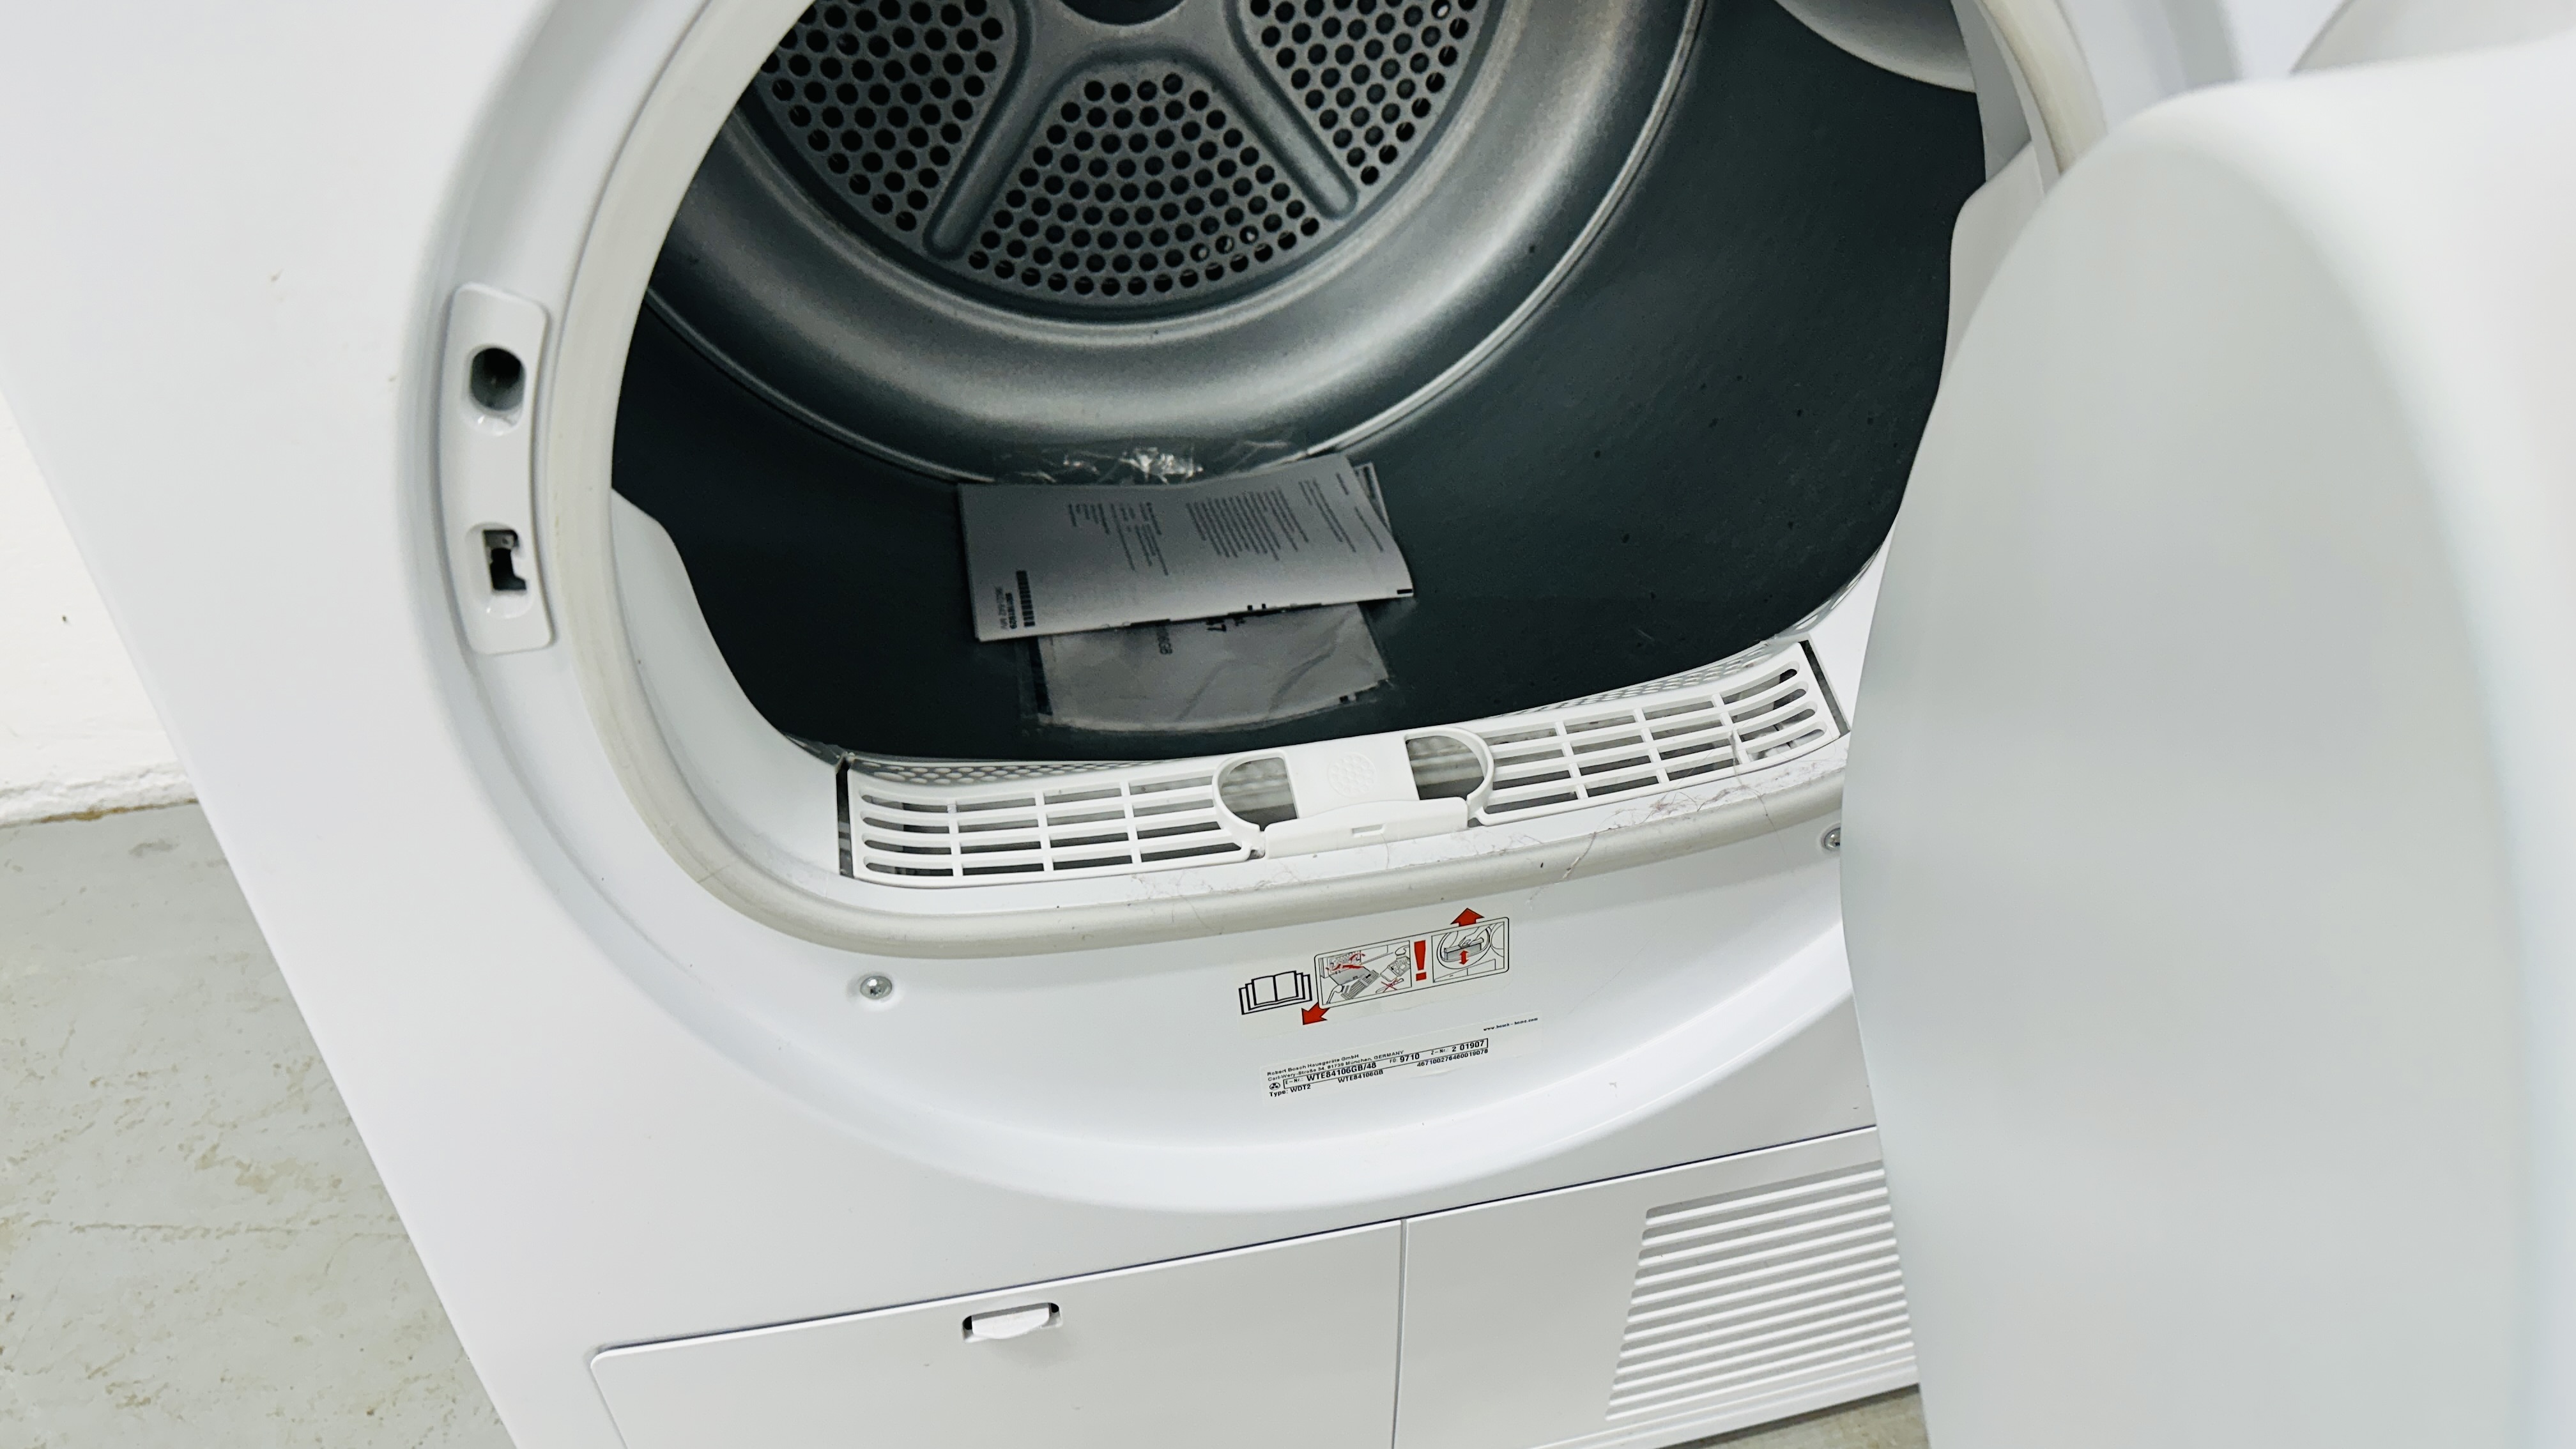 BOSCH CLASSIXX 7 CONDENSER TUMBLE DRYER - SOLD AS SEEN. - Image 6 of 7